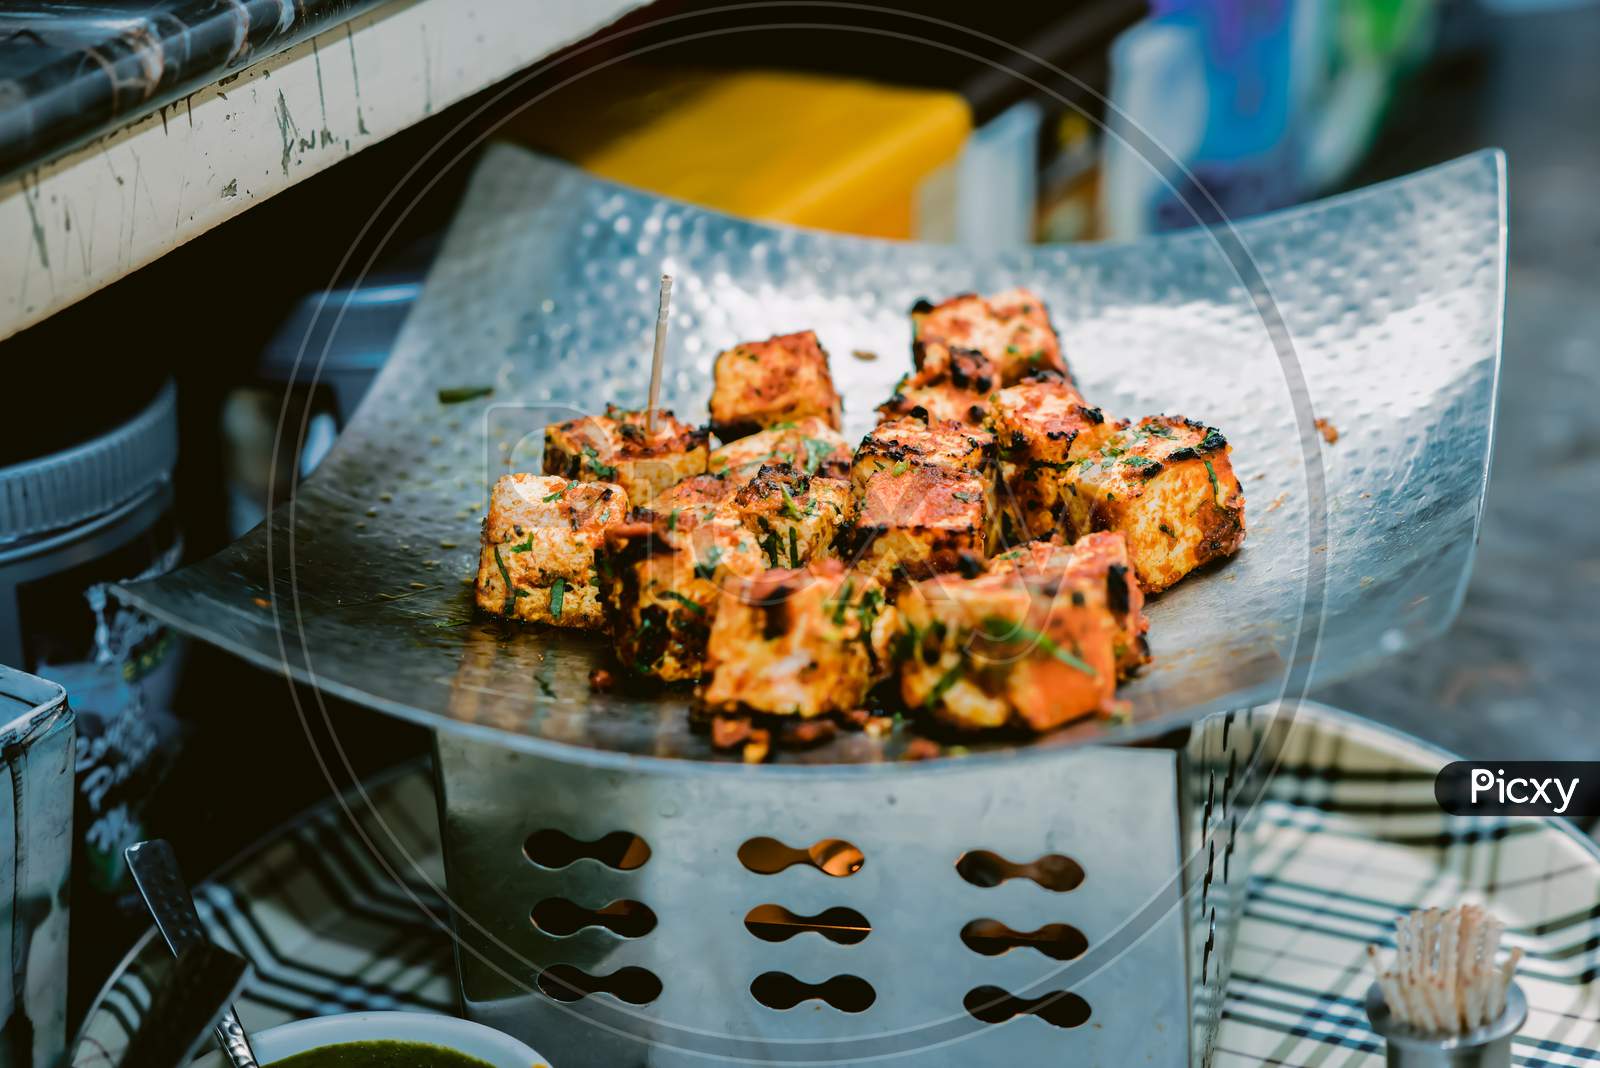 Paneer Tikka Kabab in red sauce - is an Indian dish made from chunks of cottage cheese marinated in spices & grilled in a tandoor. Served in a plate with salad & green mint chutney. Selective focus